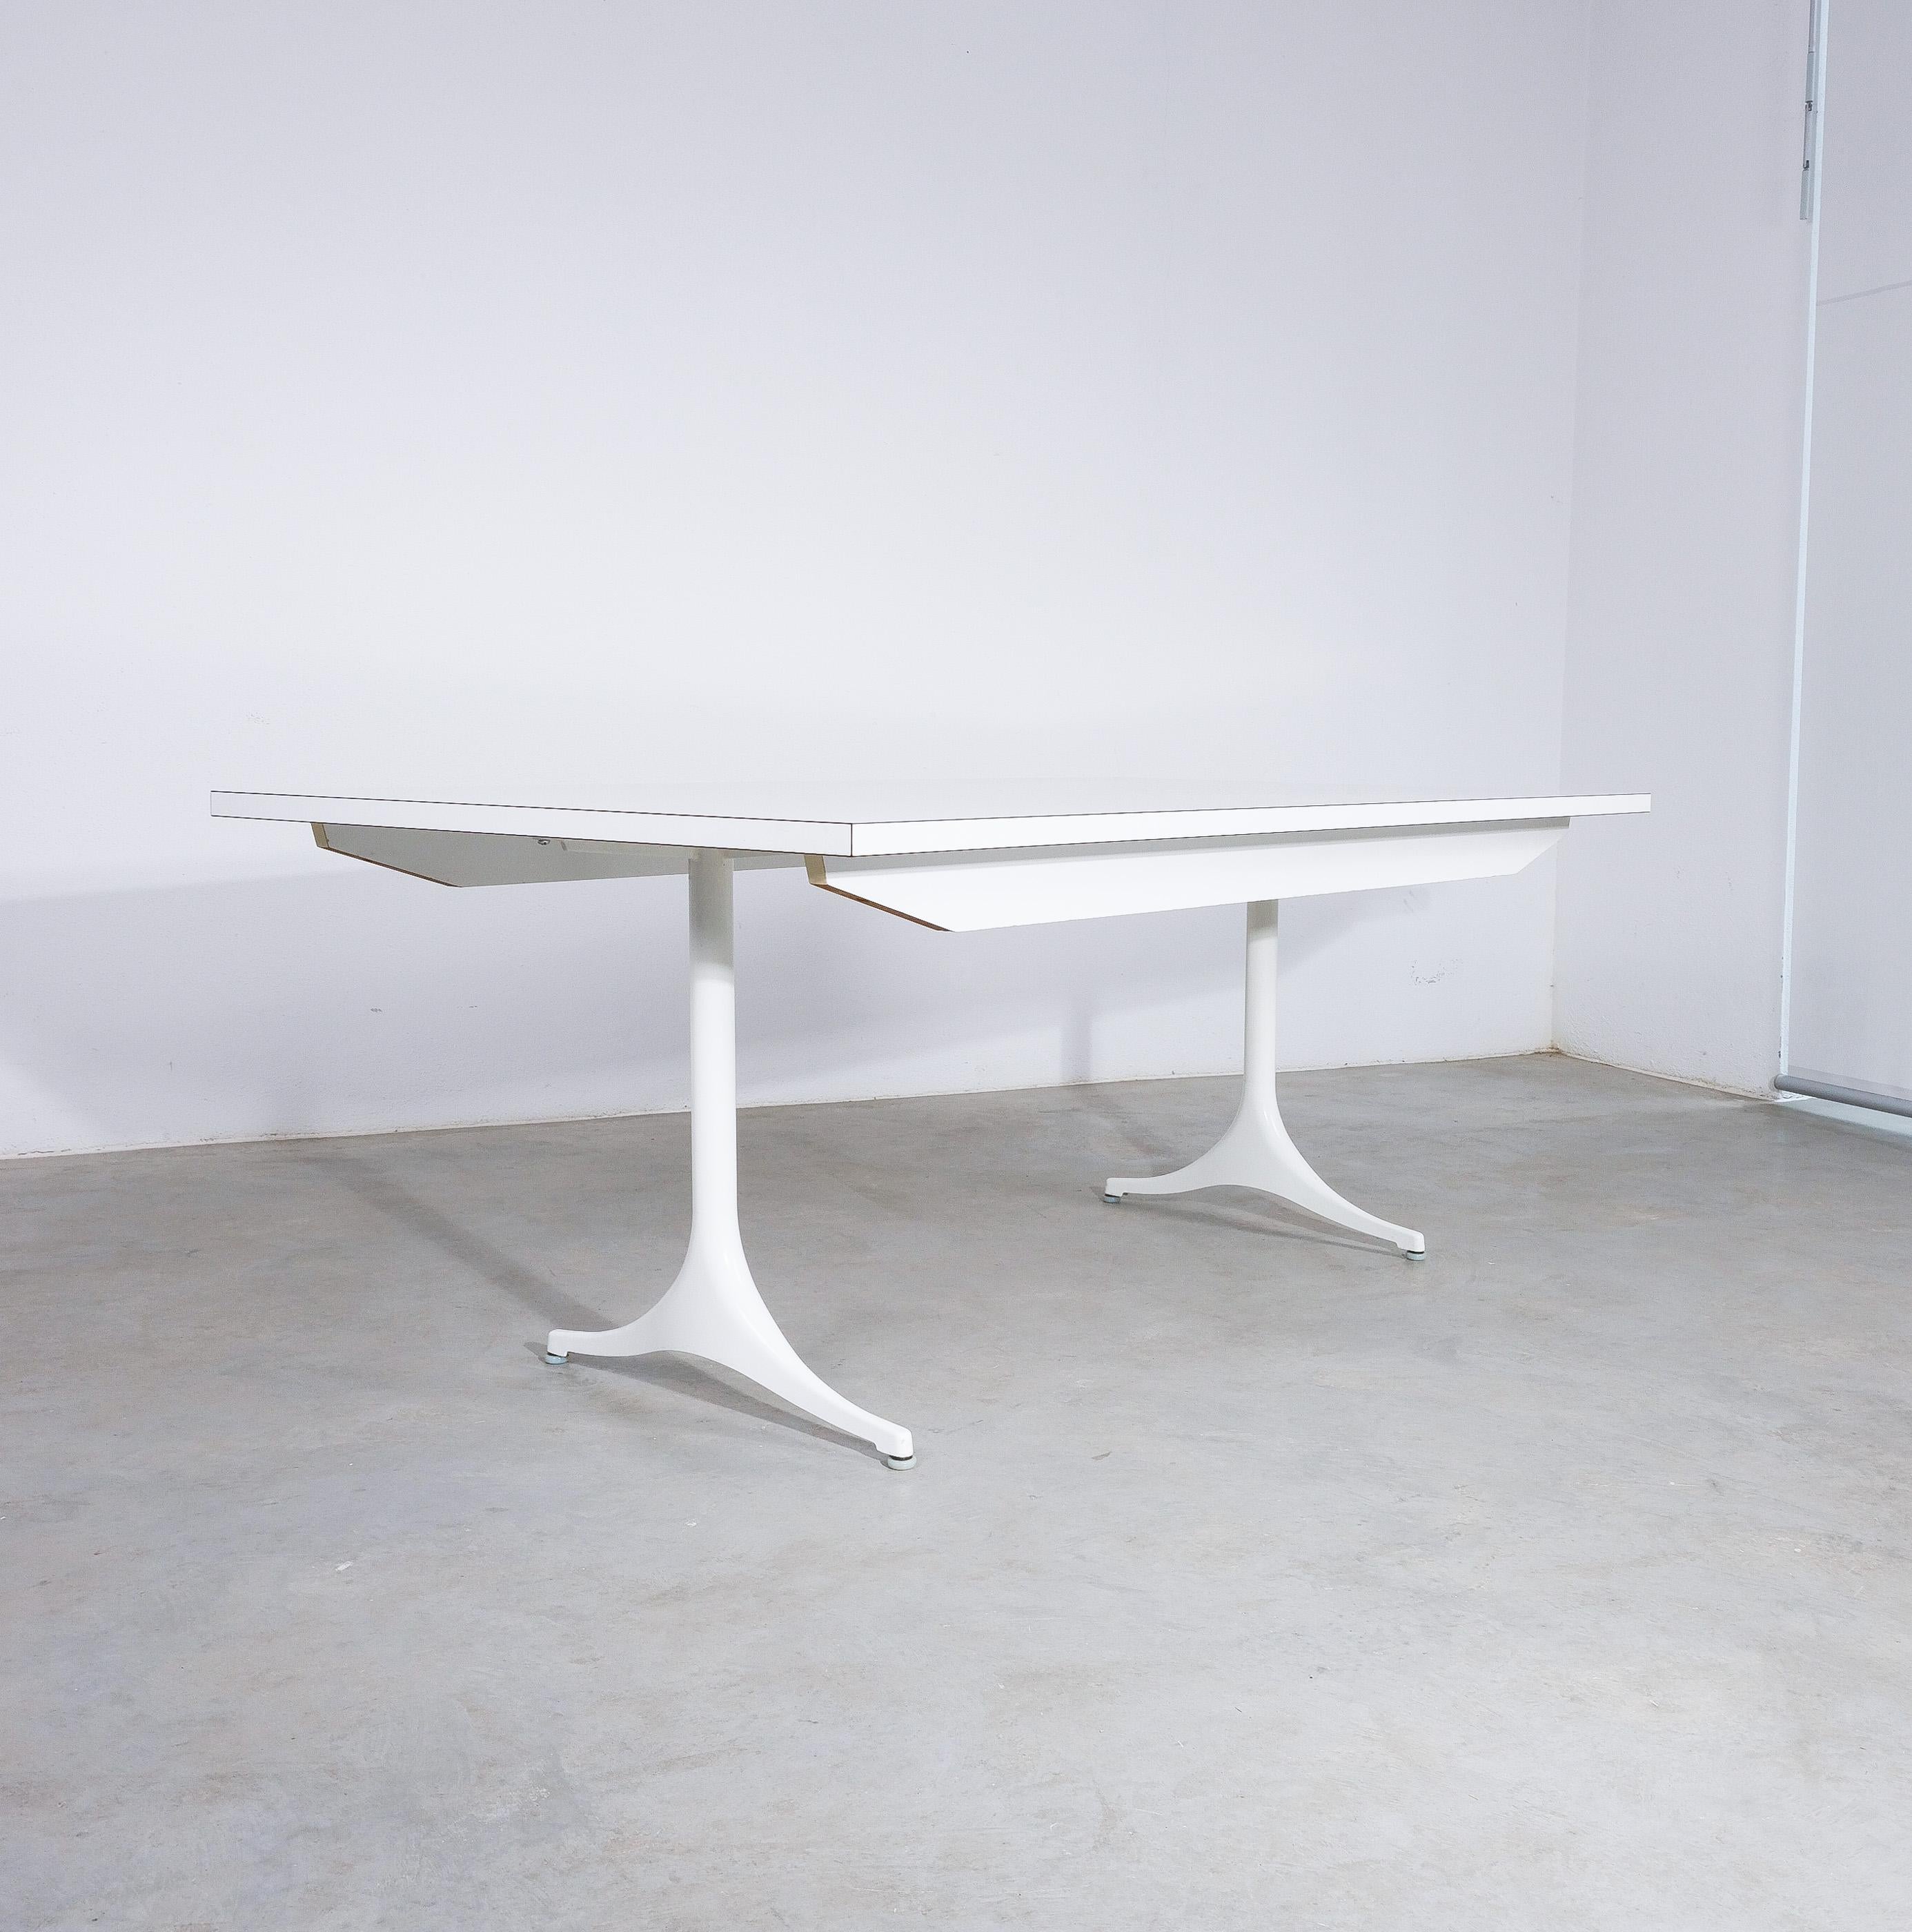 Unusual original dining or desk table by George Nelson for Herman Miller, mid century 
Dimensions are 72.04